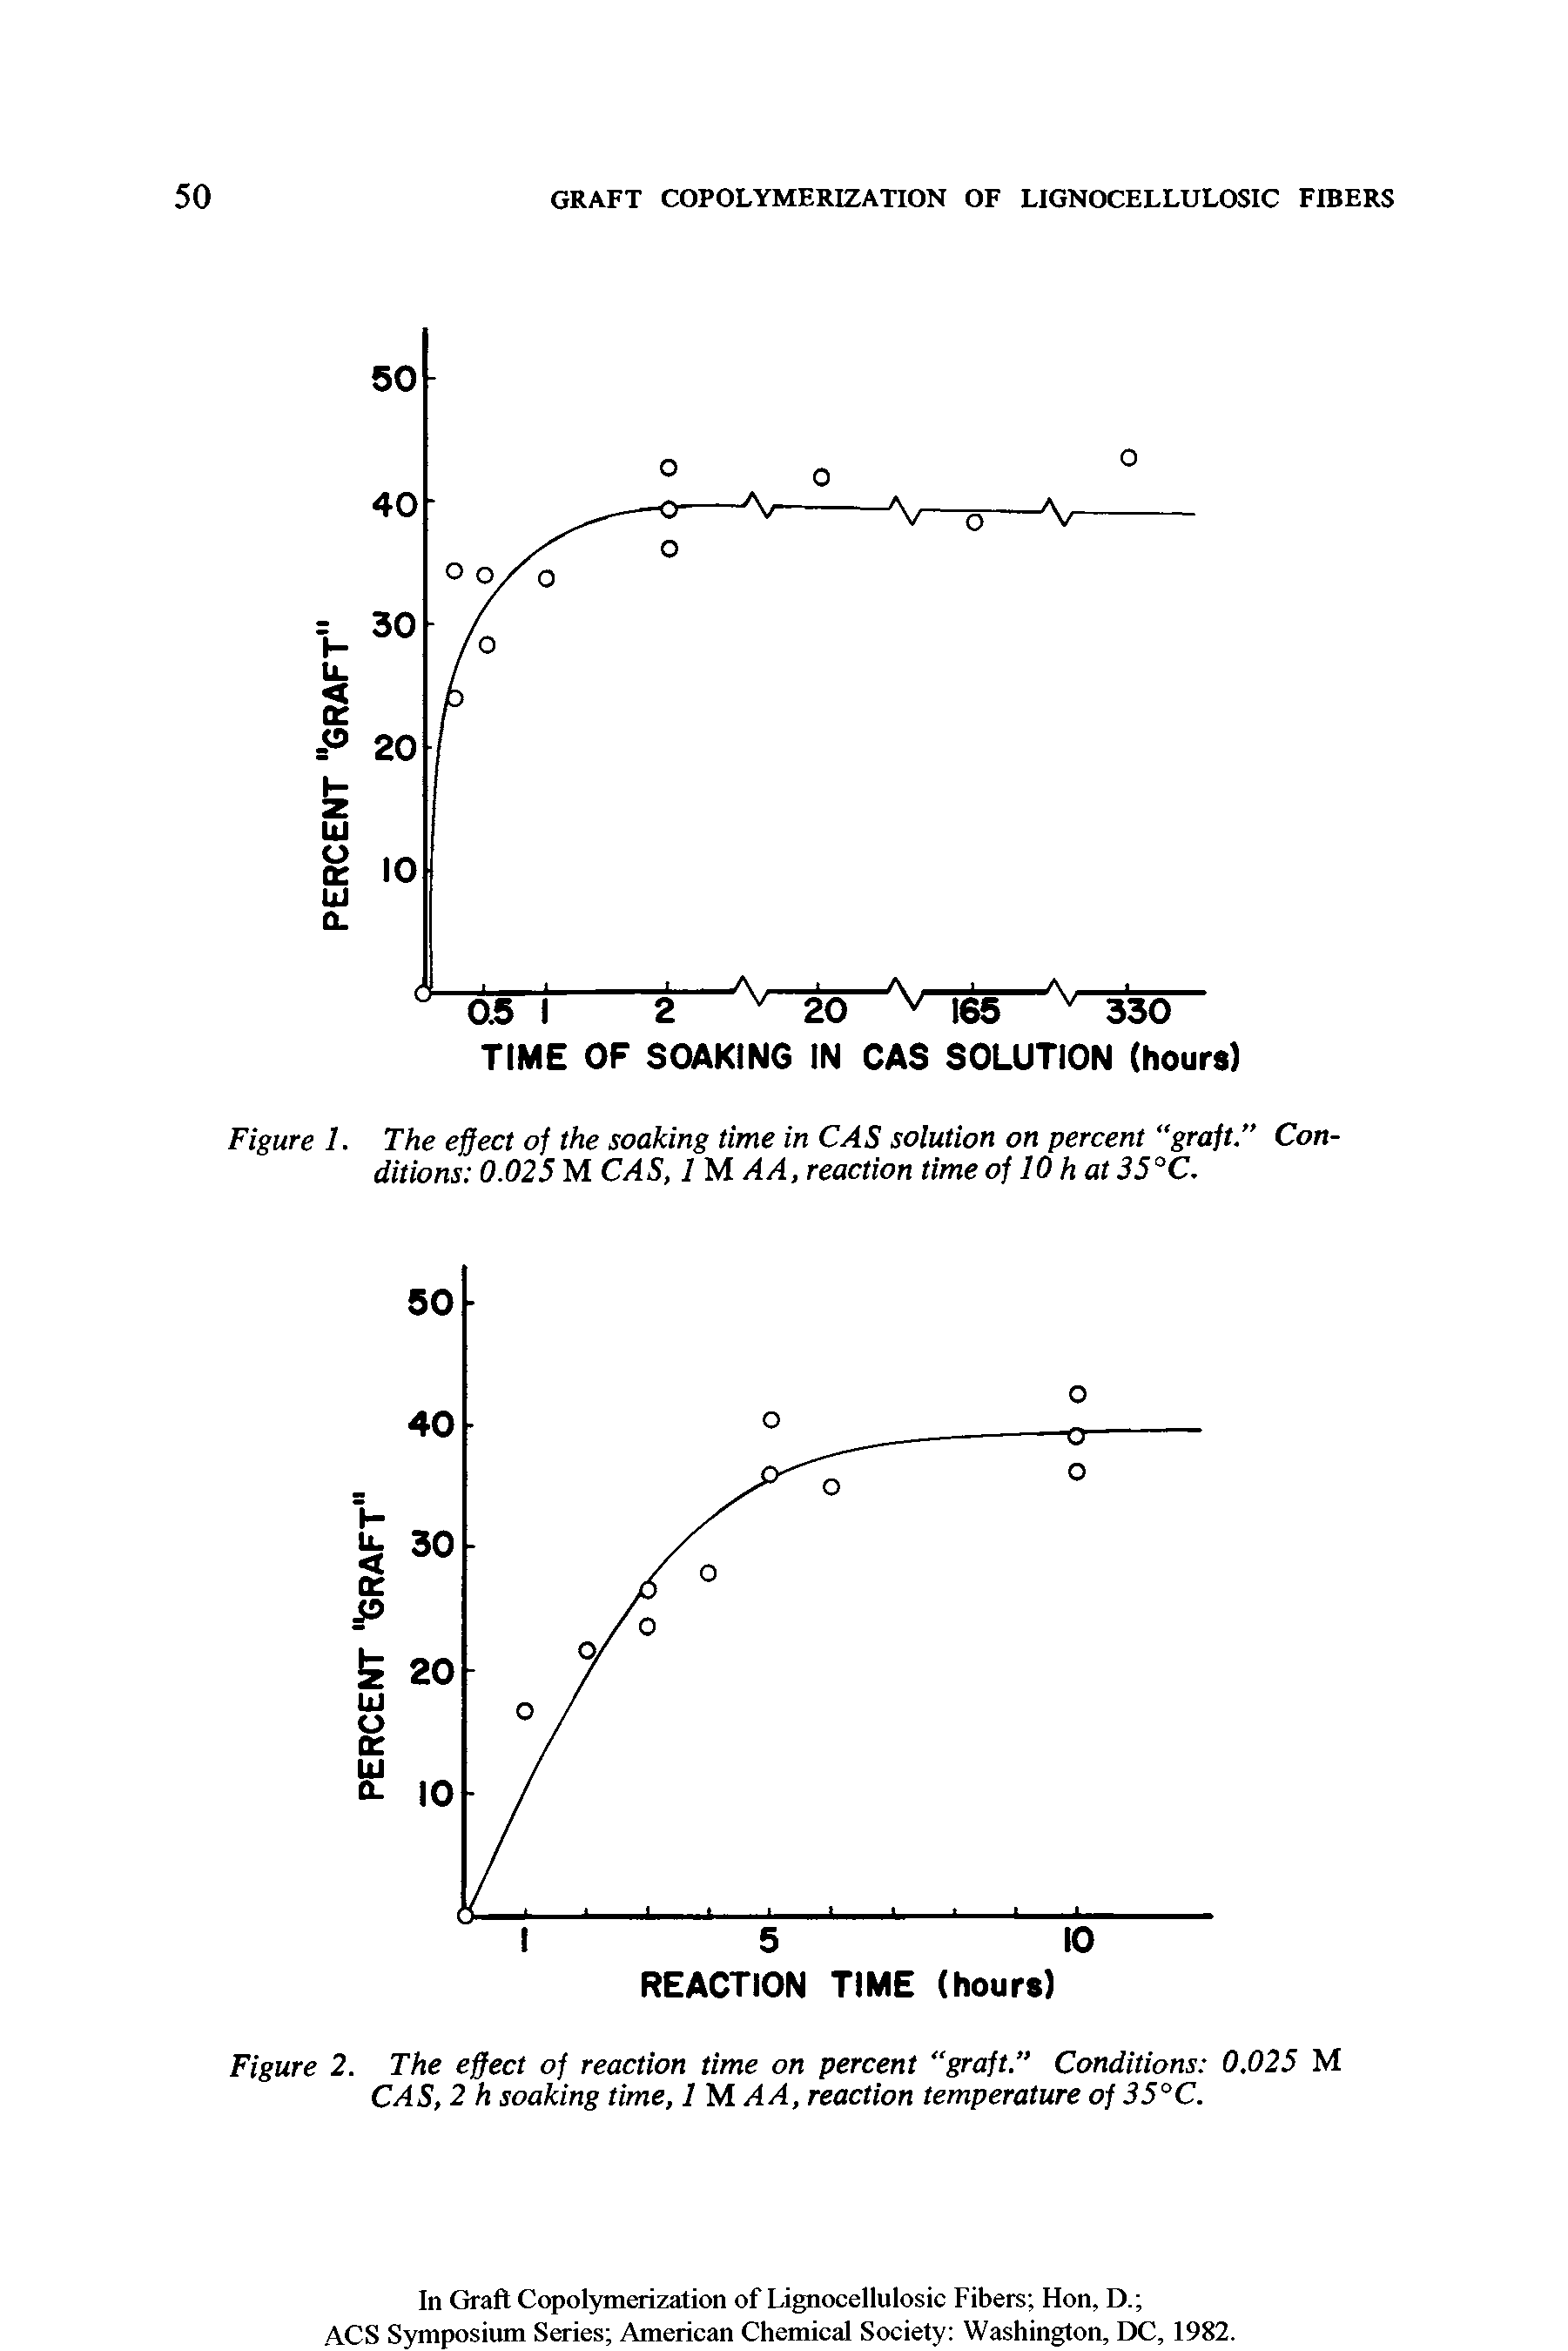 Figure 1. The effect of the soaking time in CAS solution on percent graft." Conditions 0.025 M CAS, 1 M AA, reaction time of 10 h at 35°C.